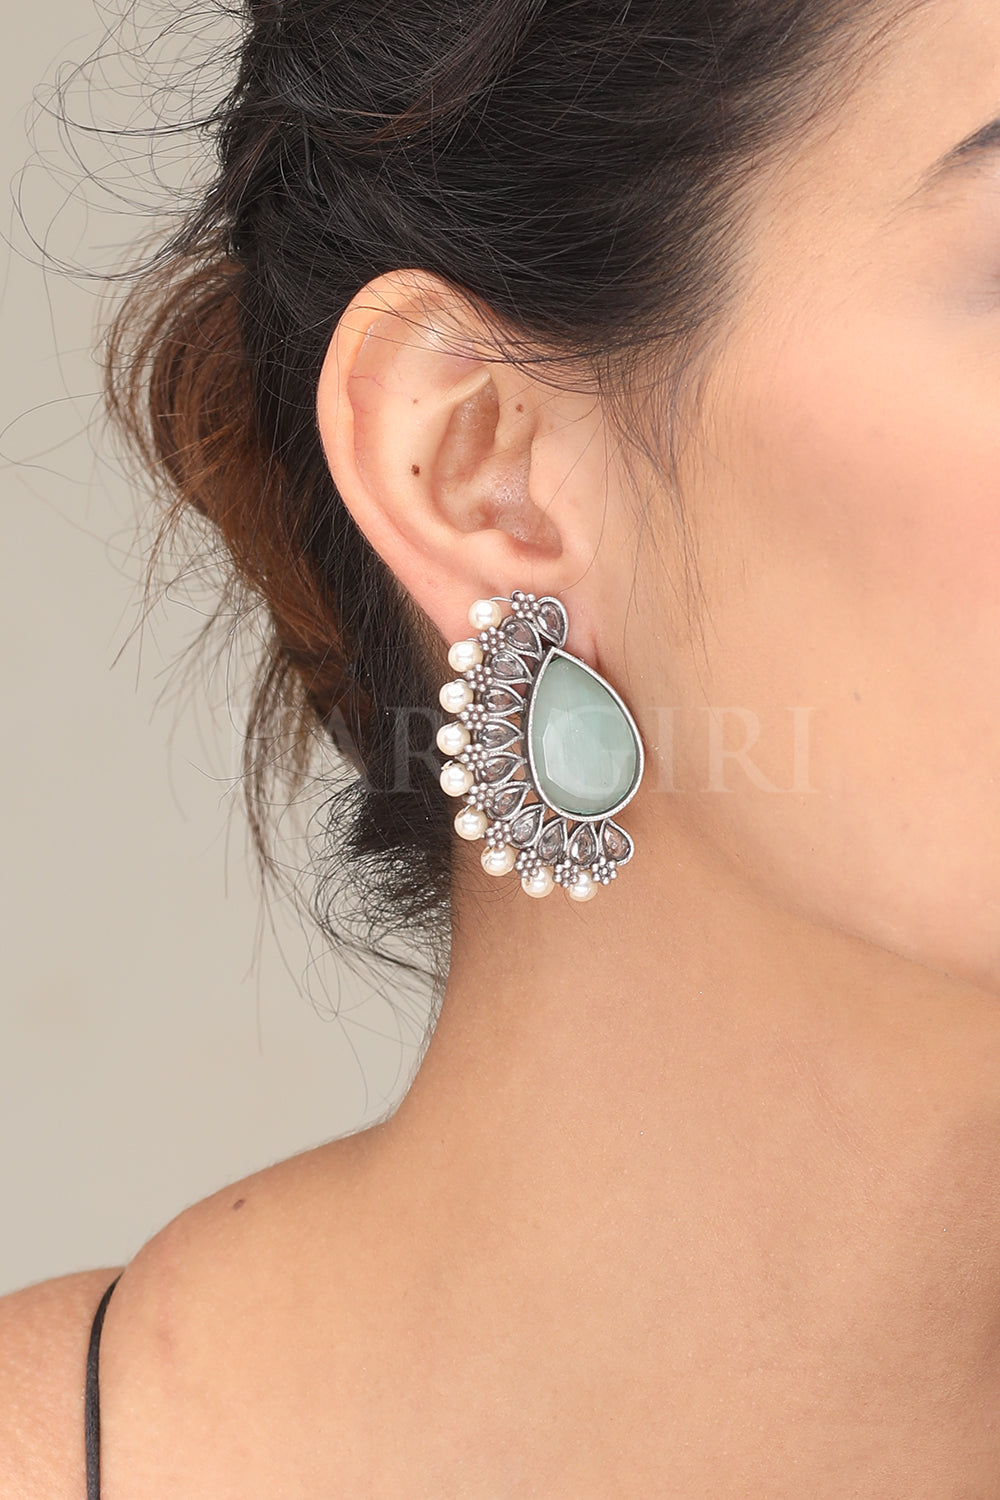 Buy 925 Artistic Silver Earring Online at Best Price – SilverStore.in